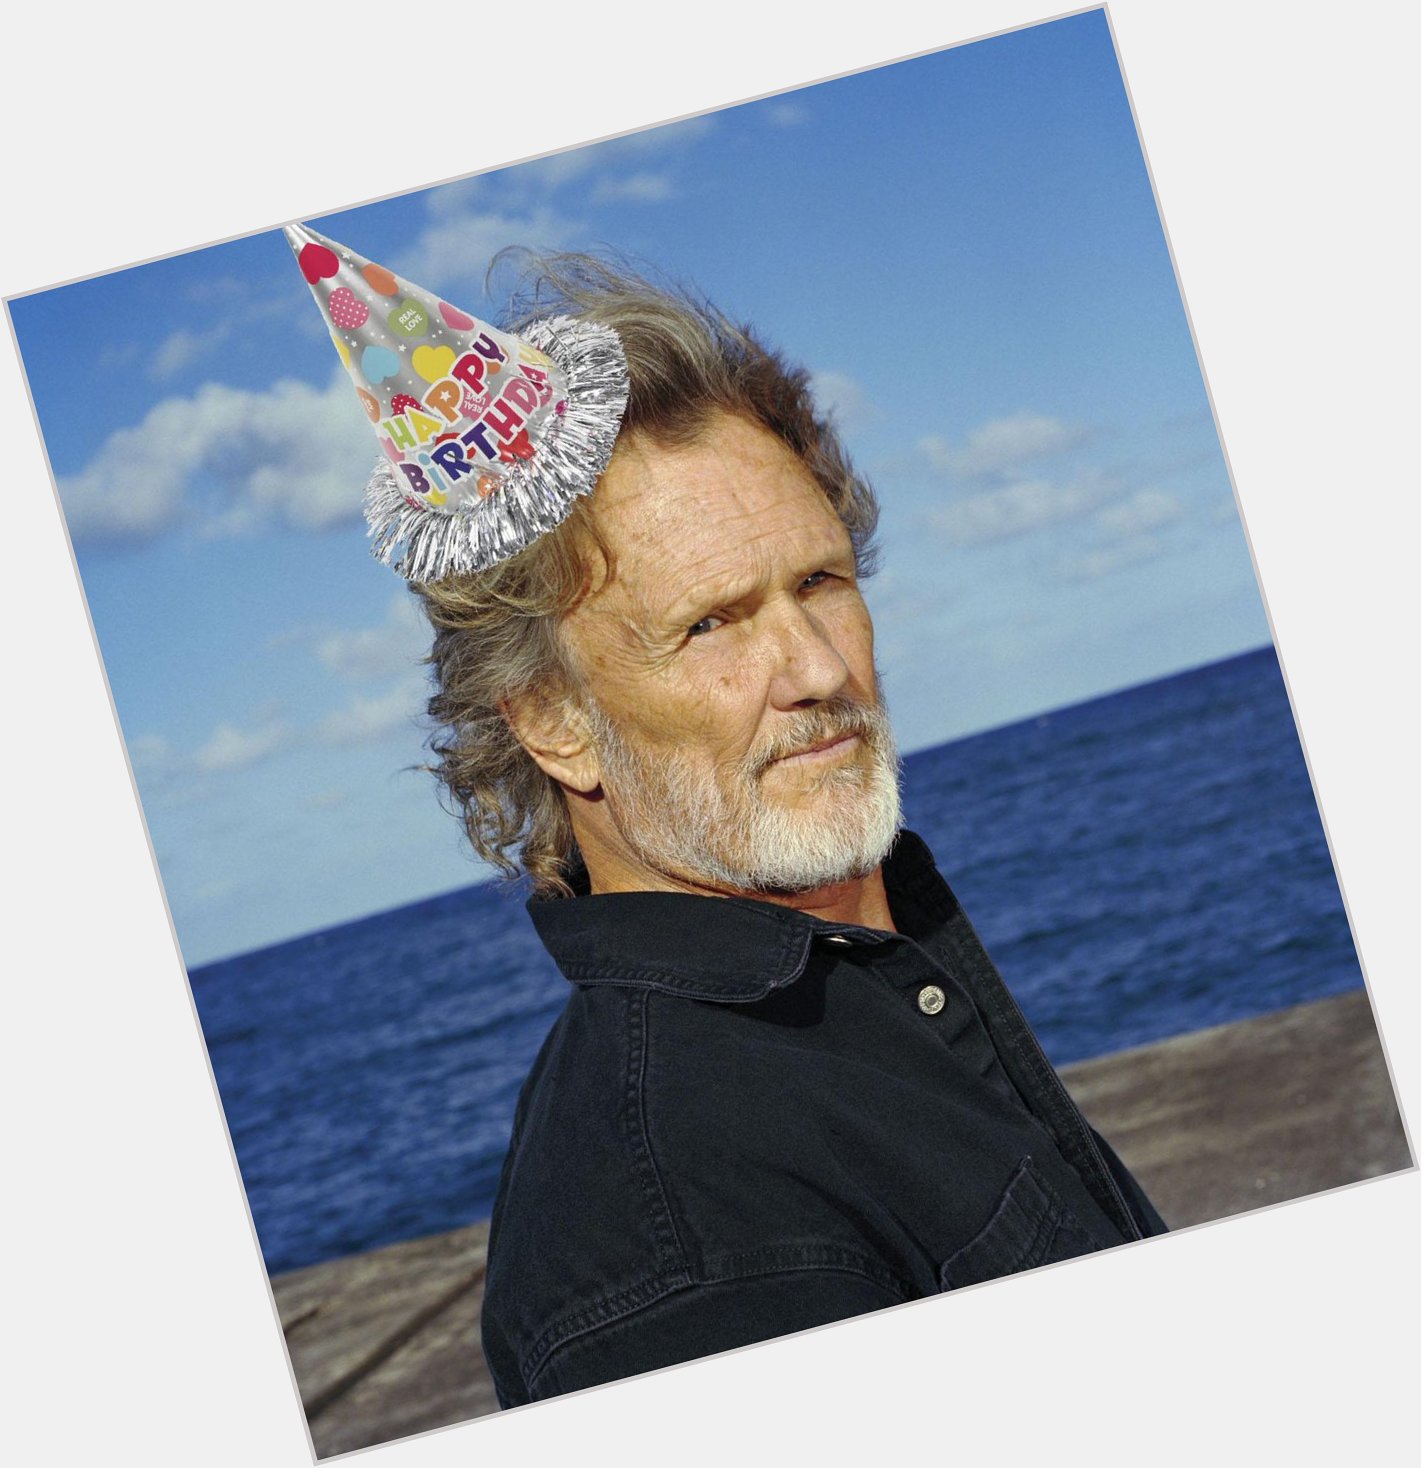 Happy Birthday, Kris Kristofferson!
Let\s all jam out to \"Me and Bobby McGee\"! 